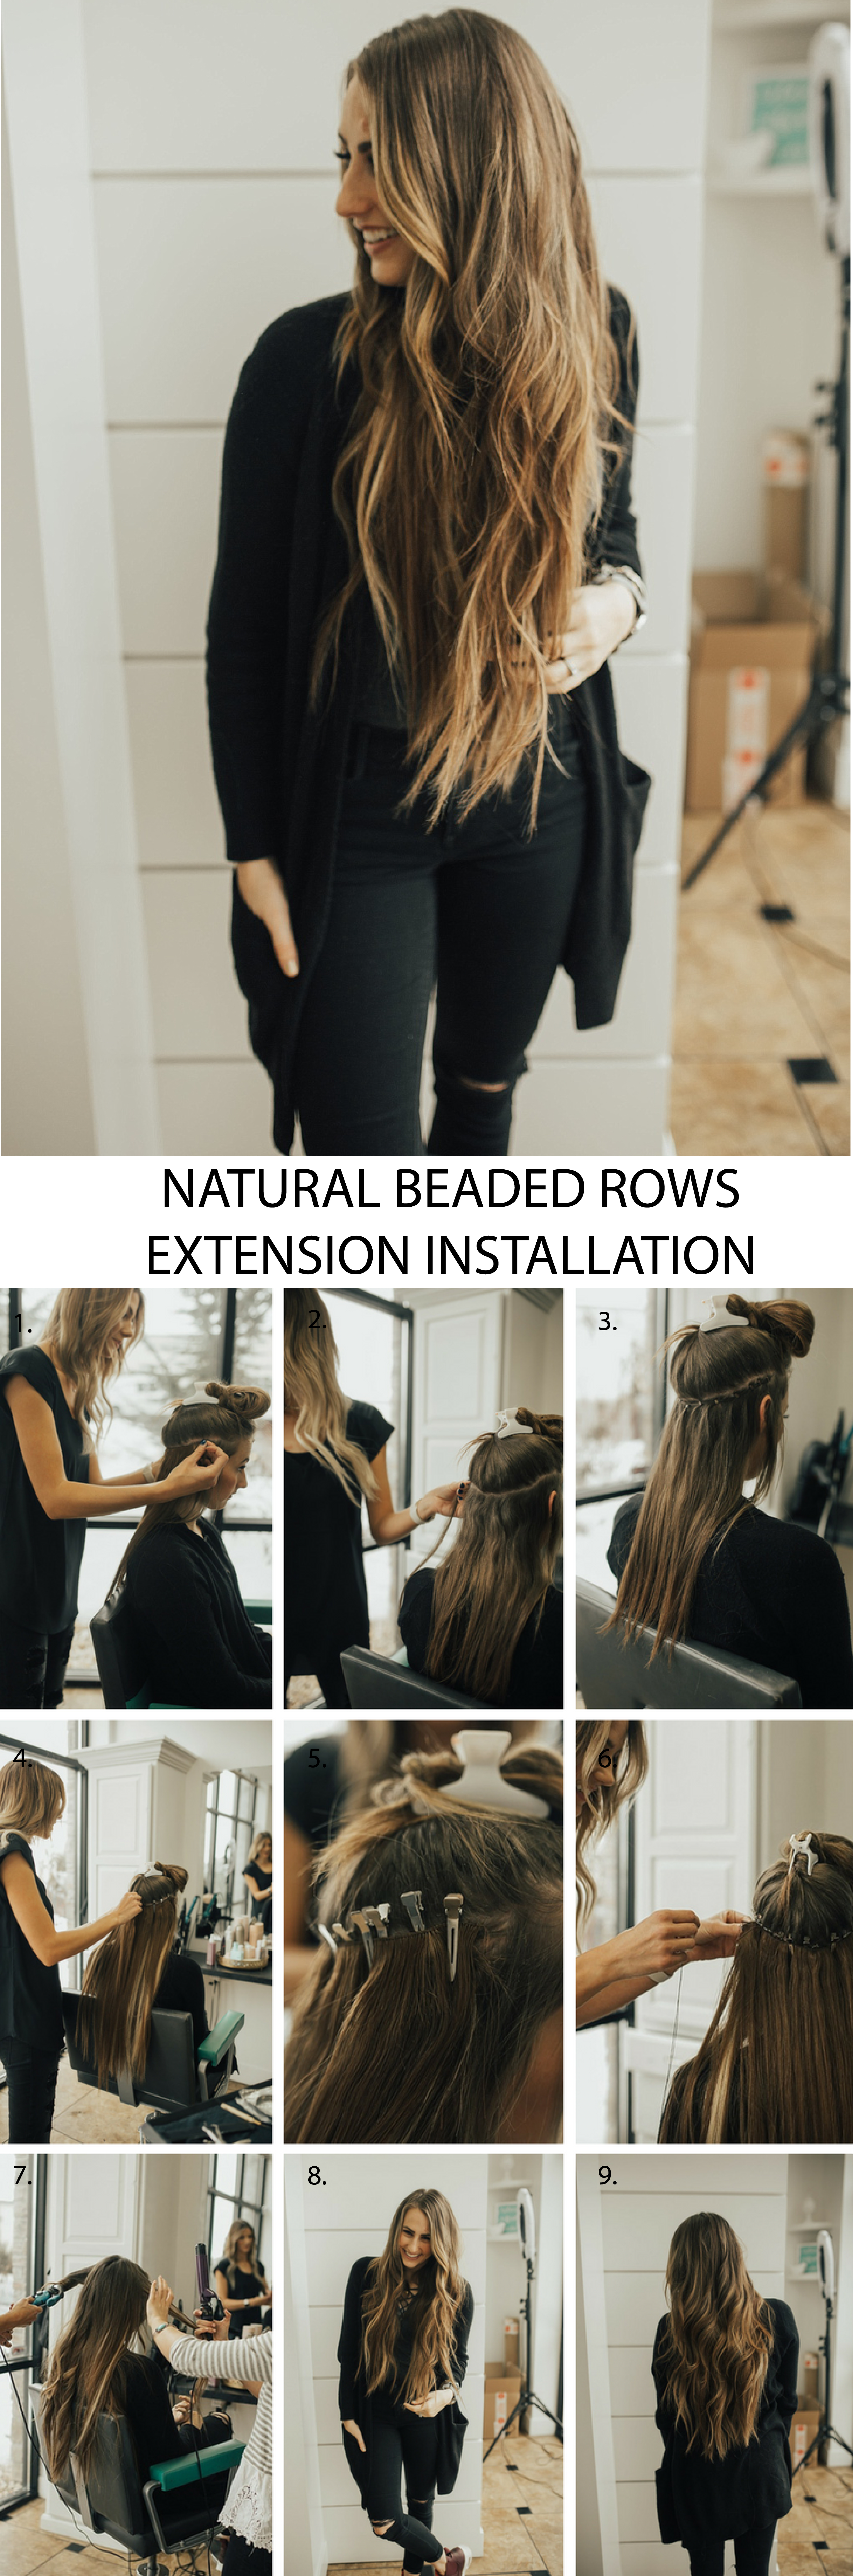 Beaded Hair Extensions Installation by Utah beauty blogger Dani Marie